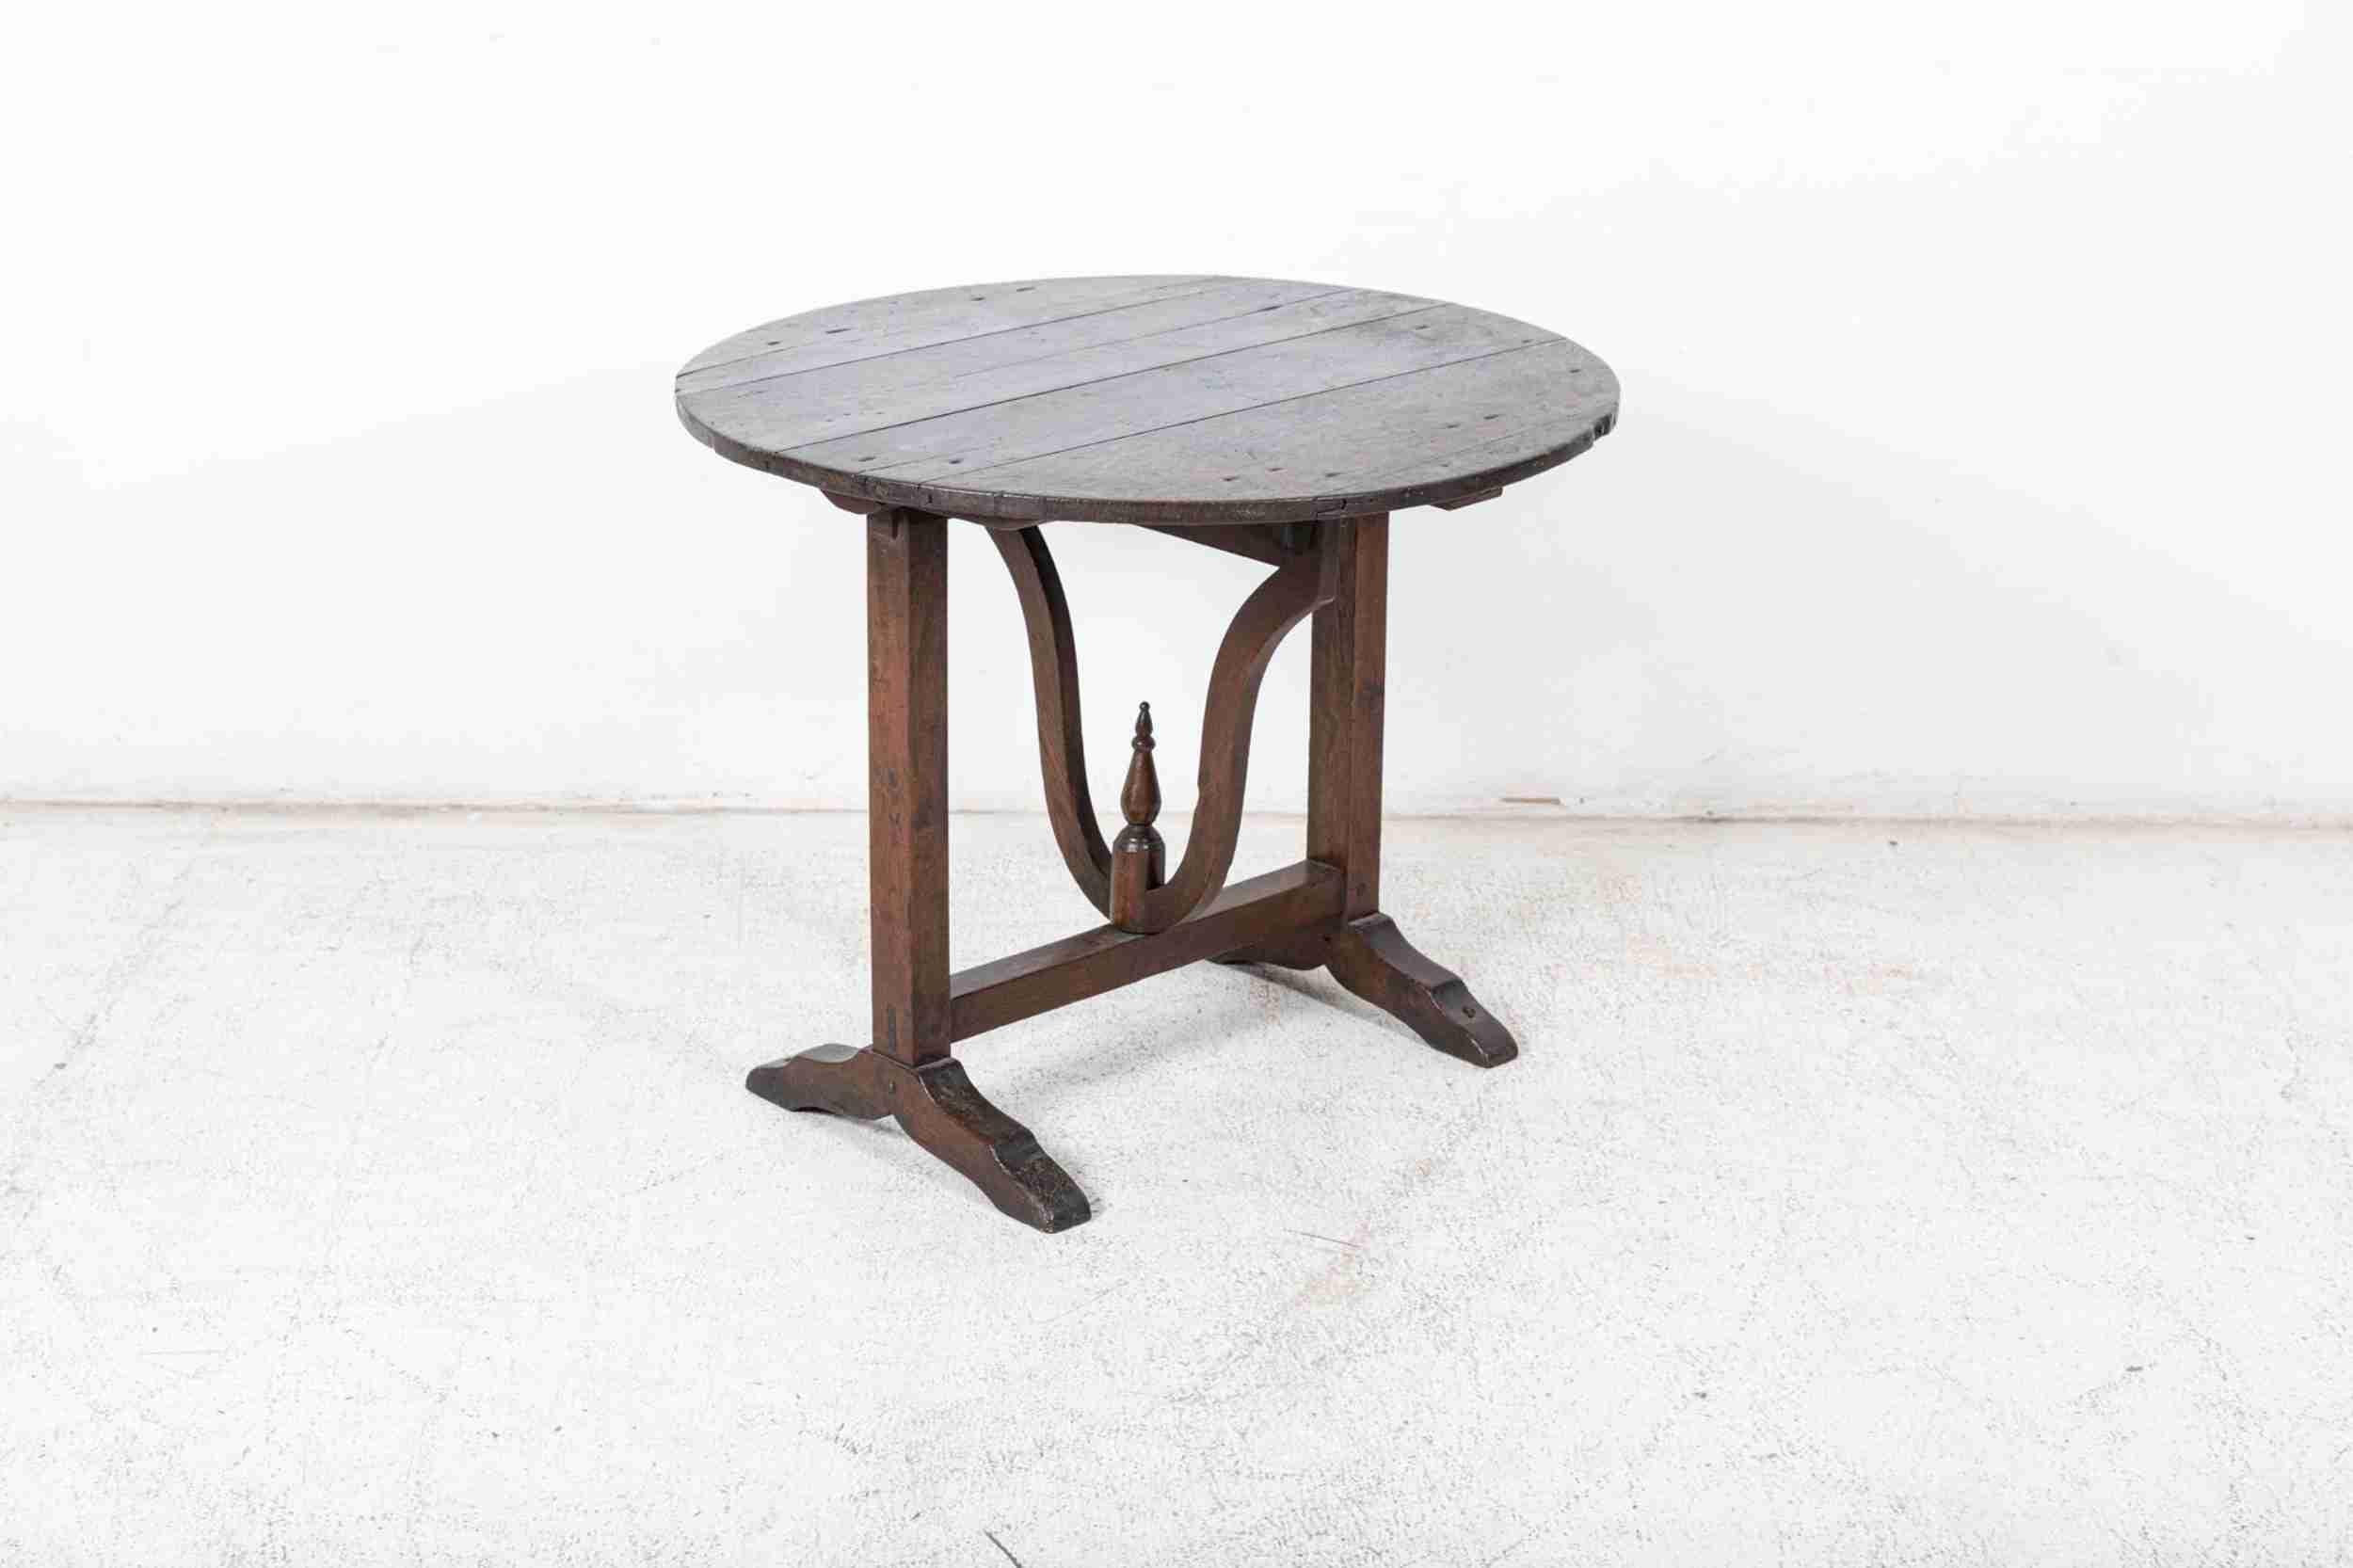 Circa 1880

19th C French Oak Vendange table

Great colour, form and patination

Measures: W 79 x D 79 x H 63 cm.

 